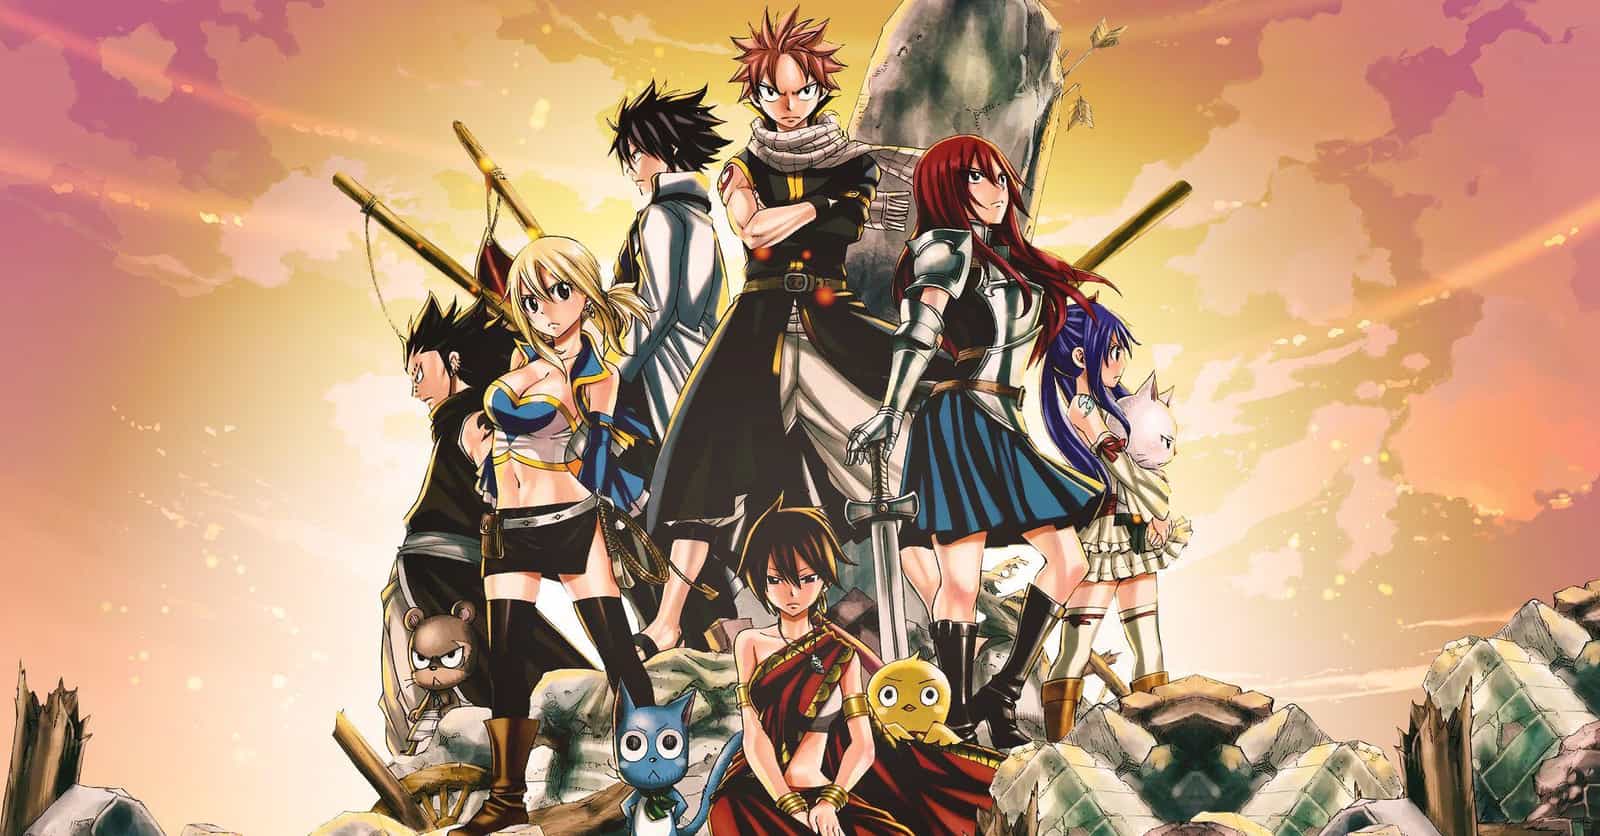 Every Fairy Tail Opening Theme Ranked Best to Worst